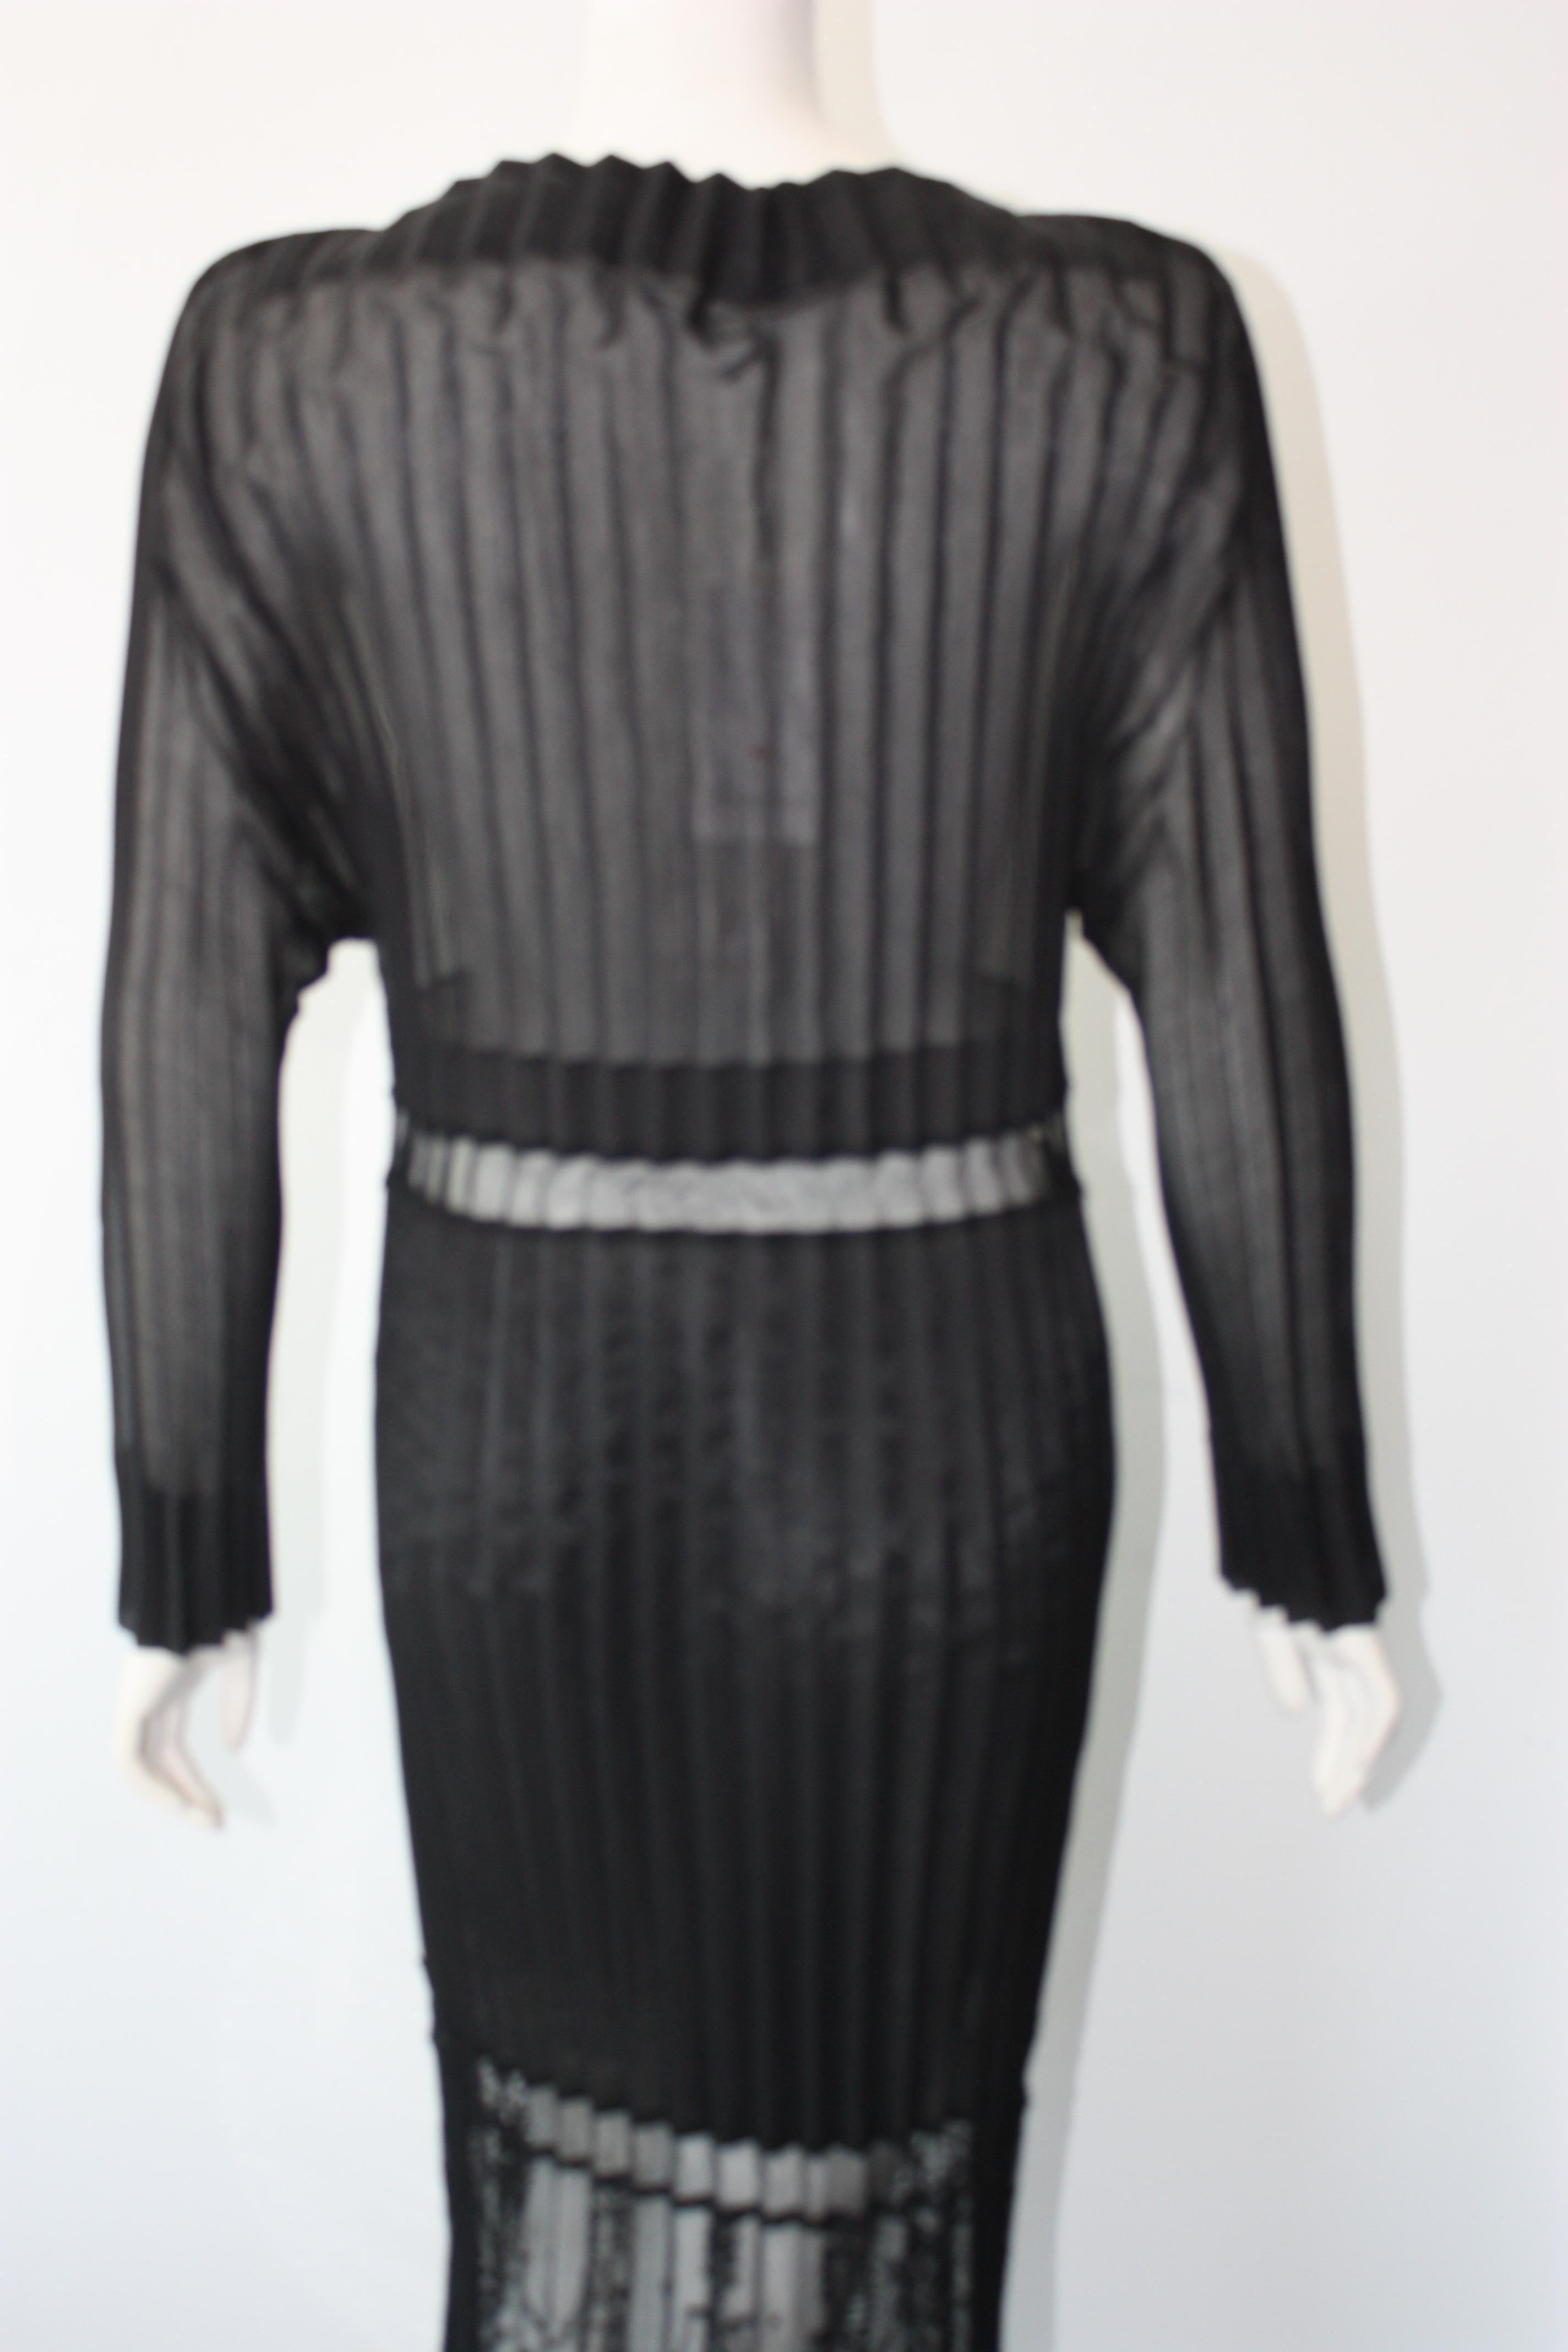 Stella McCartney Black Midi Sheer and Pleated Lace Dress Size 42 For Sale 6